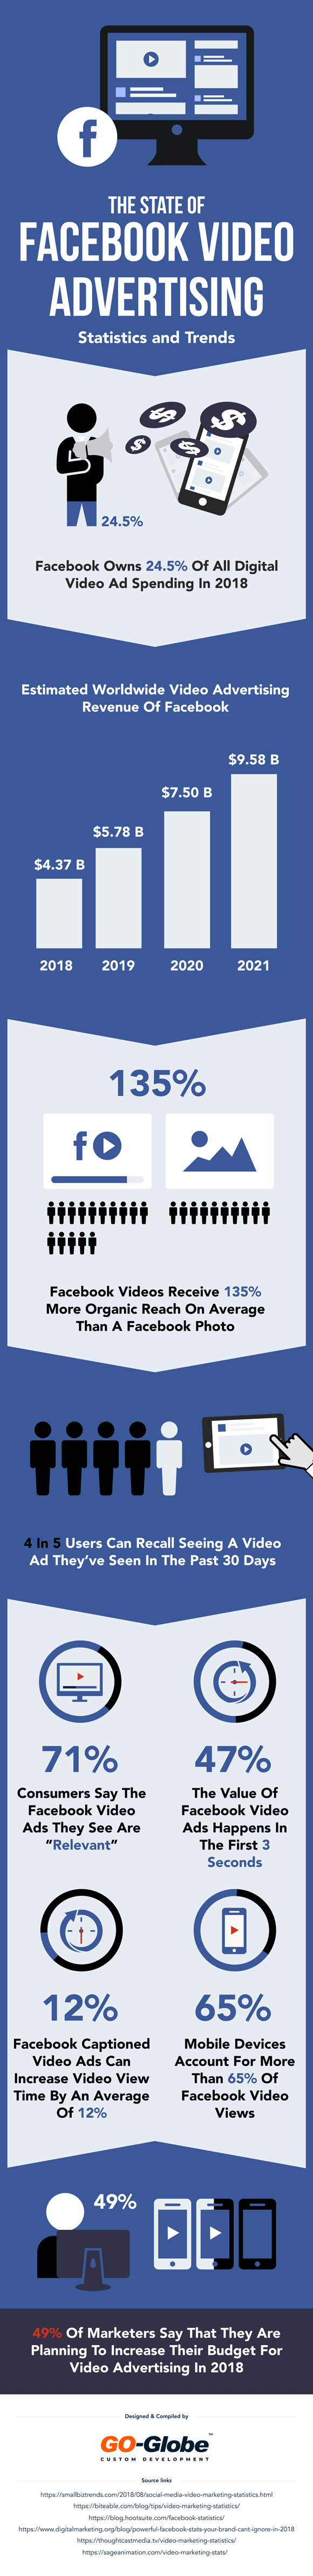 Facebook video advertising statistics and trends